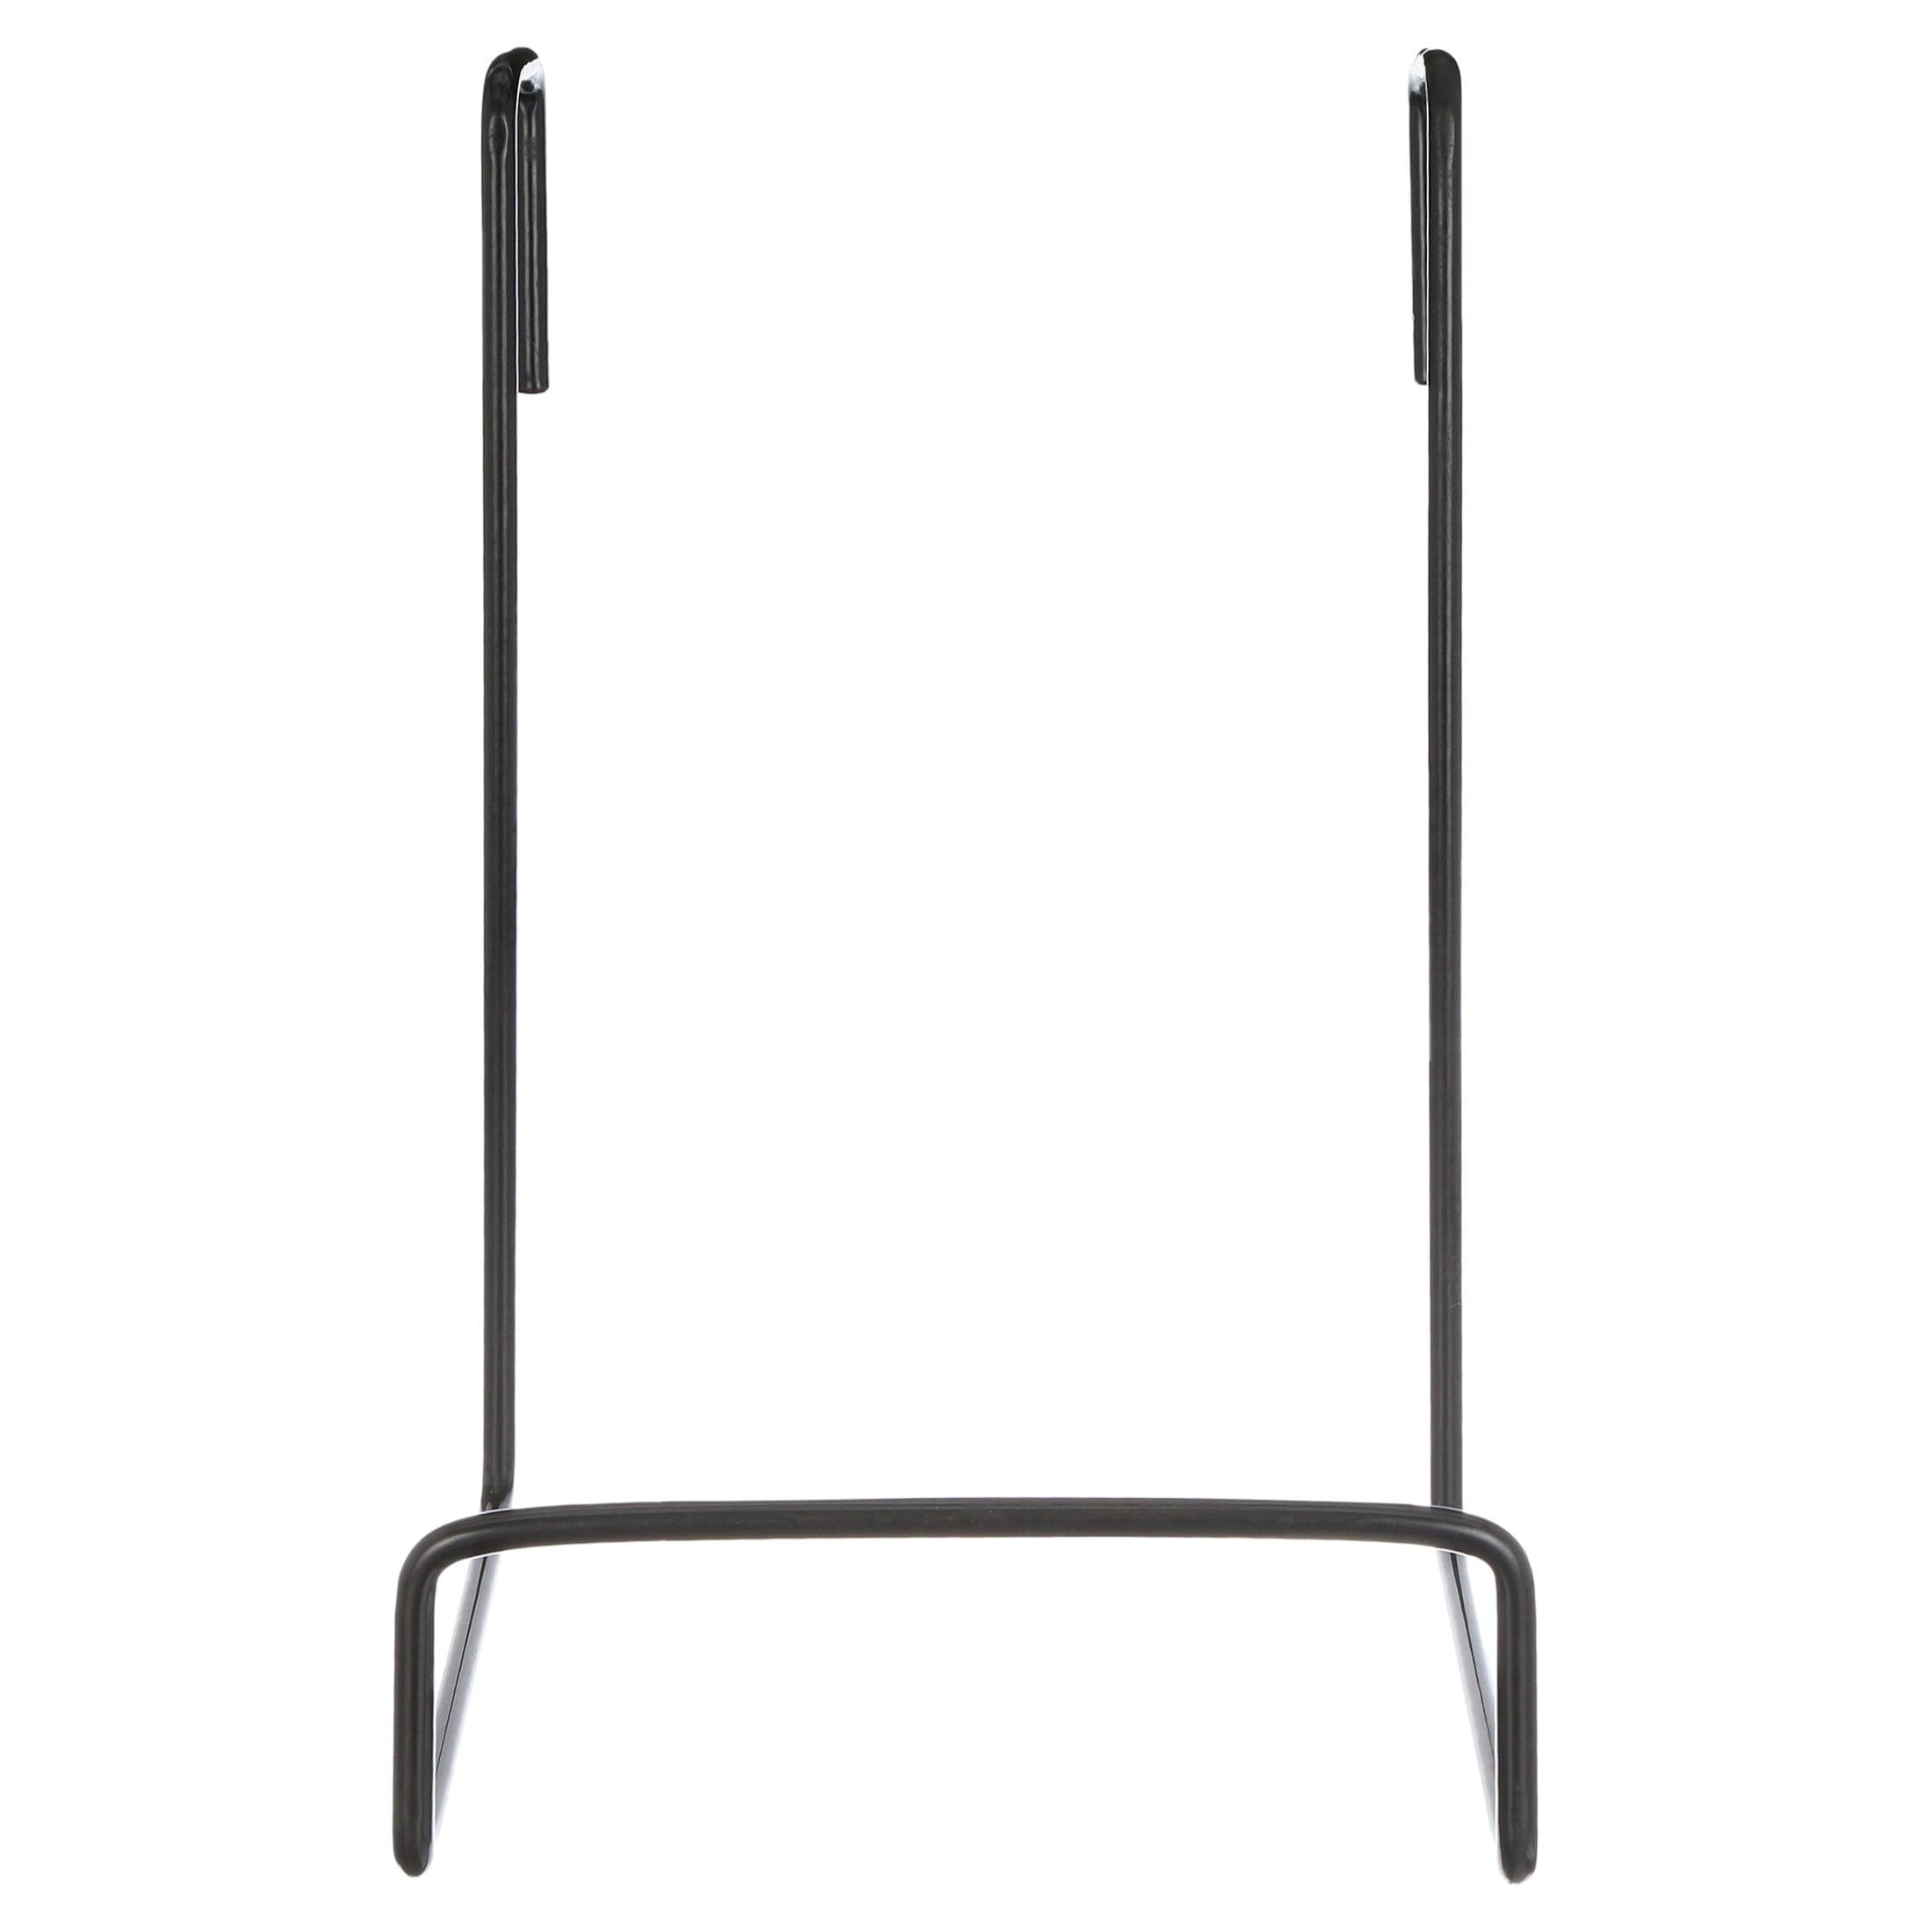 Beach Chairs During Travel-Black Picnic 21029 Camco Heavy Duty Rack-Hook on RV Ladder to Support Folding 